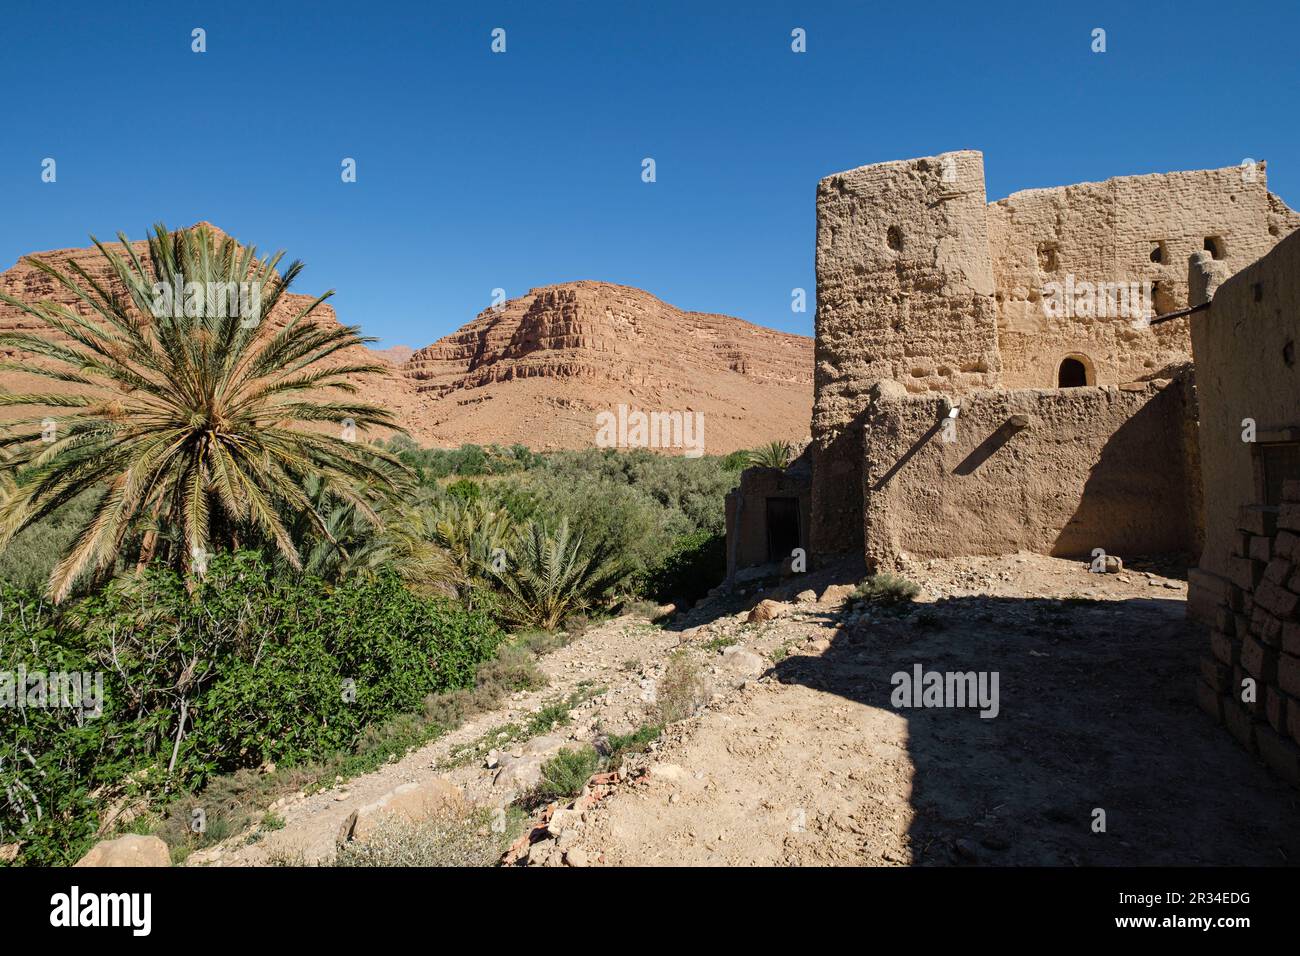 mud and adobe architecture, Ifri kasbah, Ziz river valley, Atlas mountains, Morocco, Africa. Stock Photo